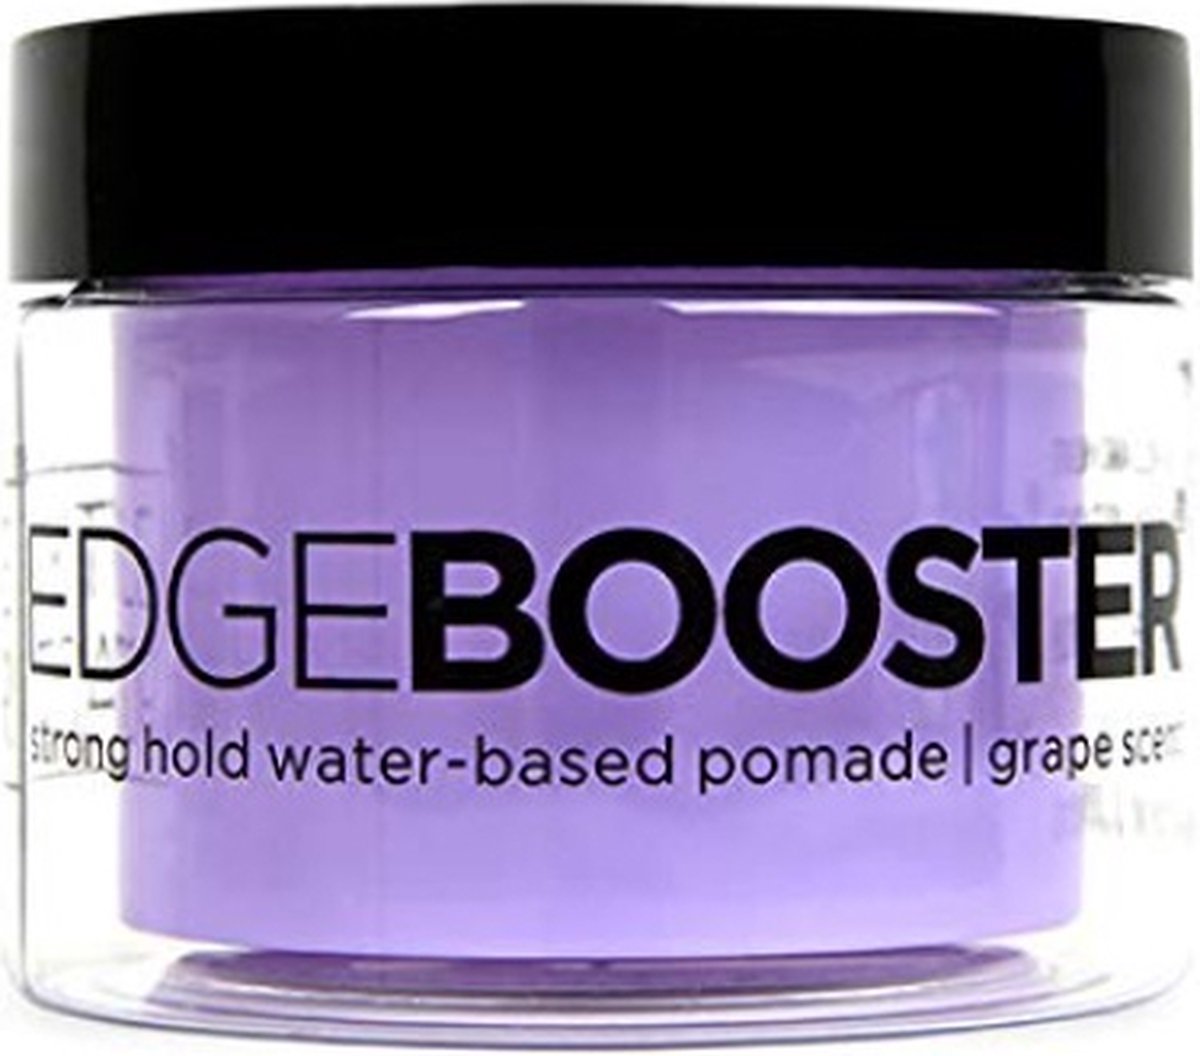 Style Factor Edge Booster Pomade Grape